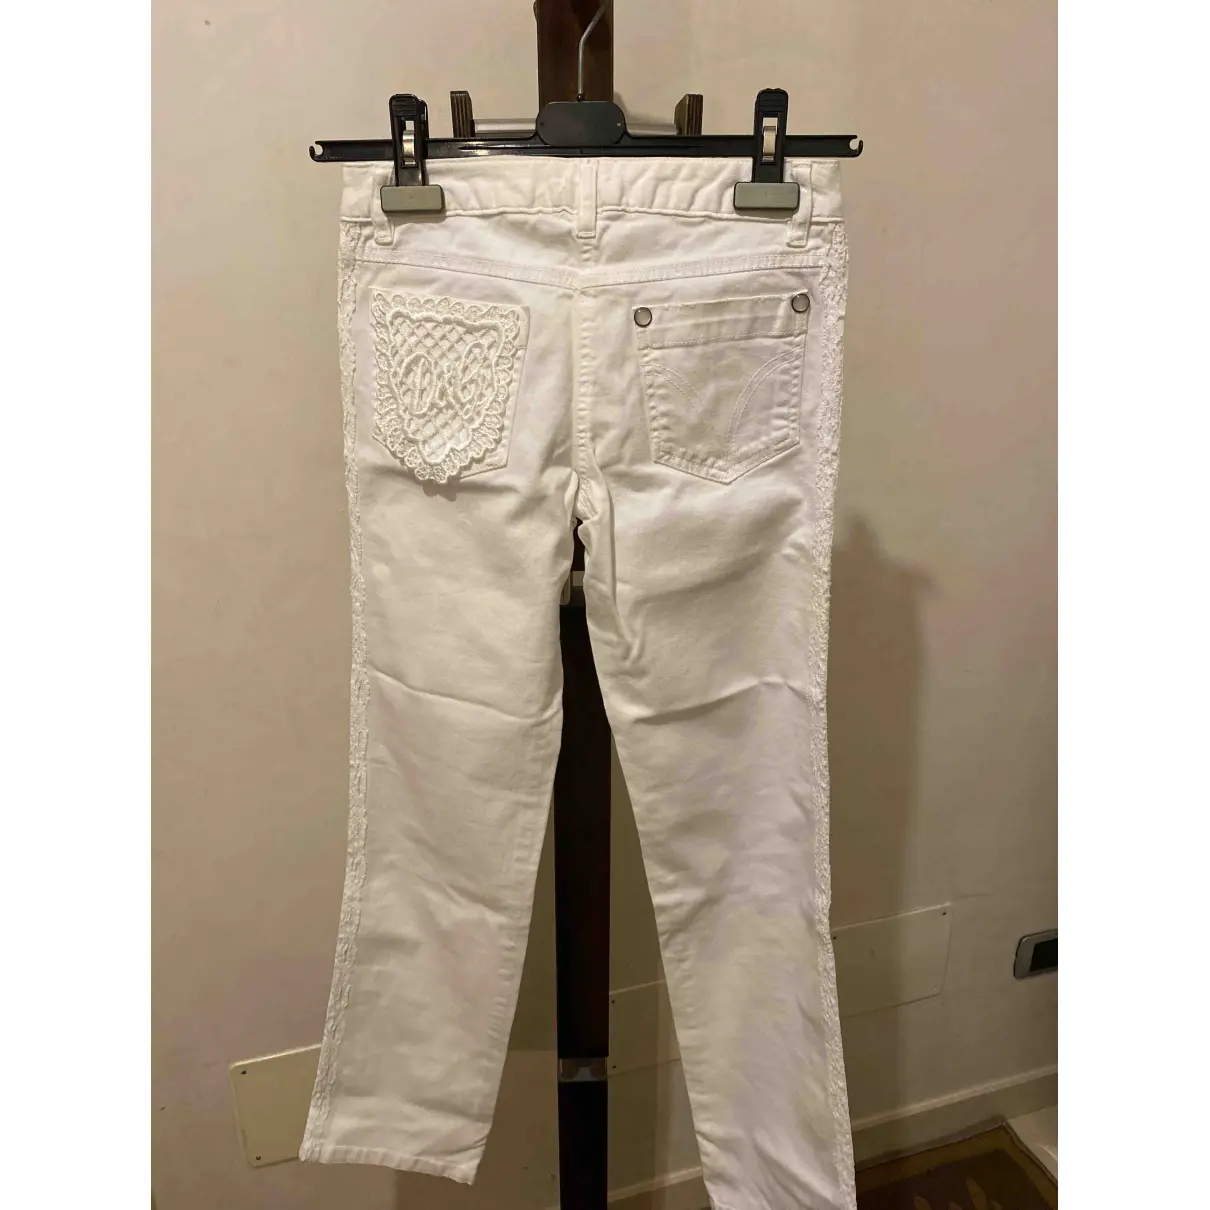 Buy D&G White Cotton Trousers online